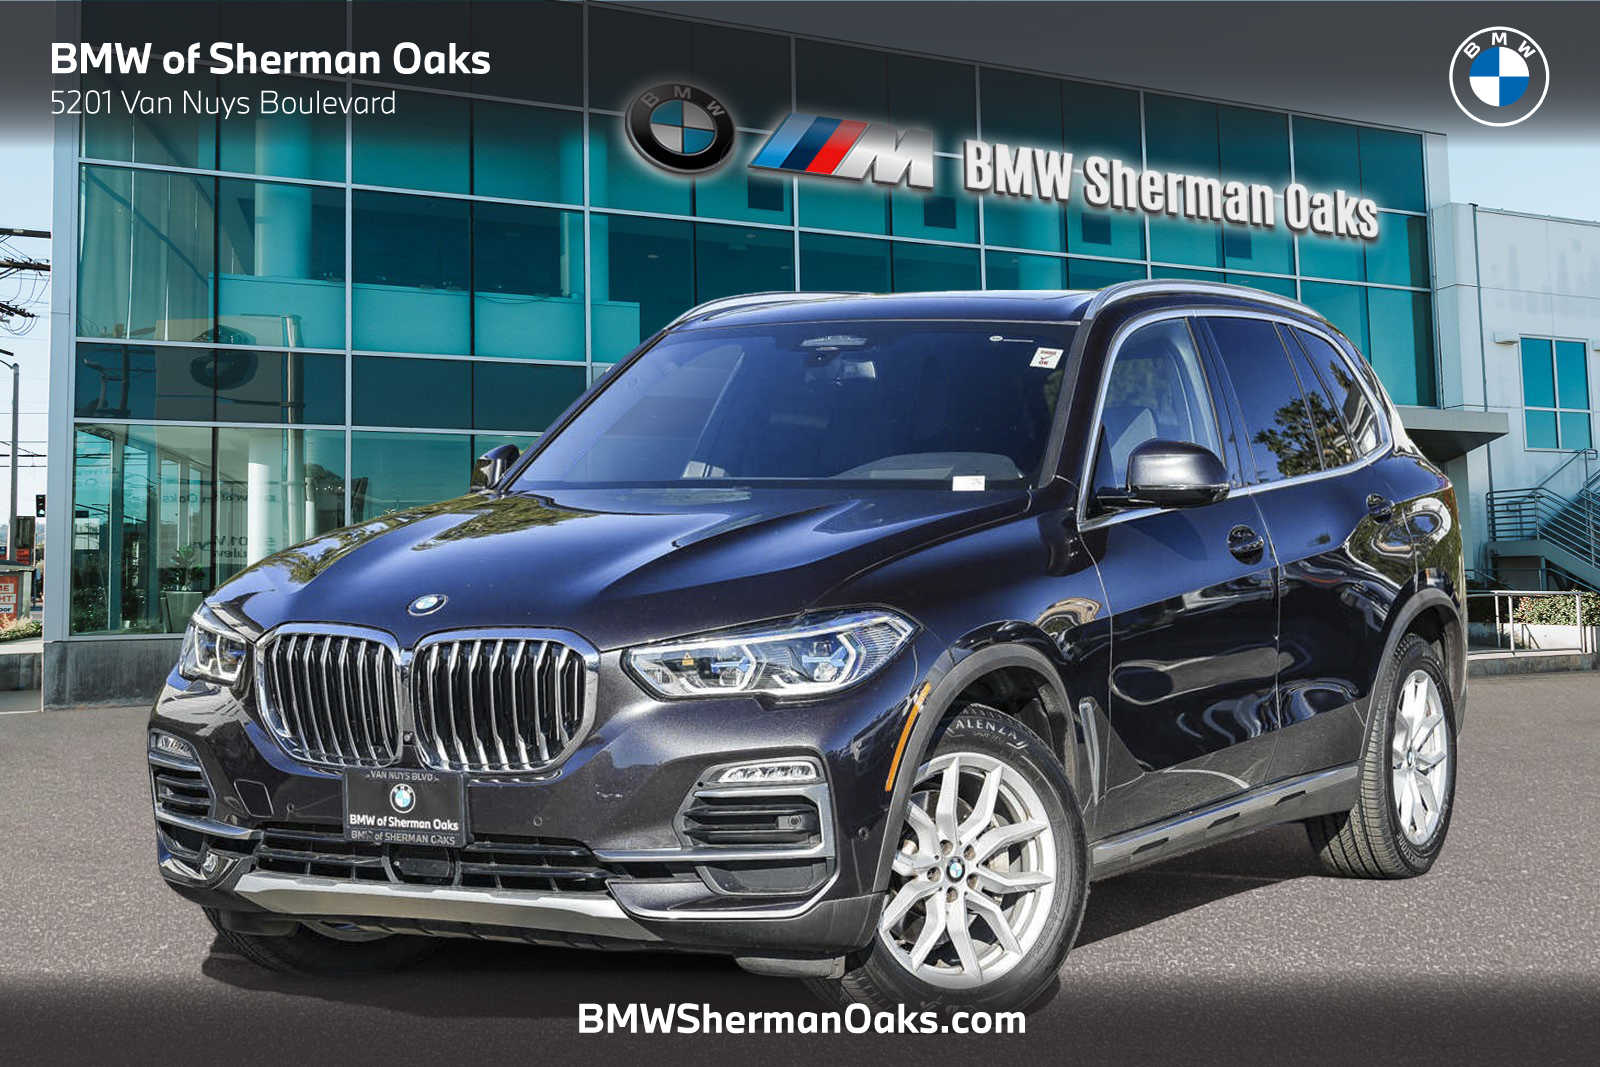 Pre-Owned BMW X5 For Sale in Sherman Oaks